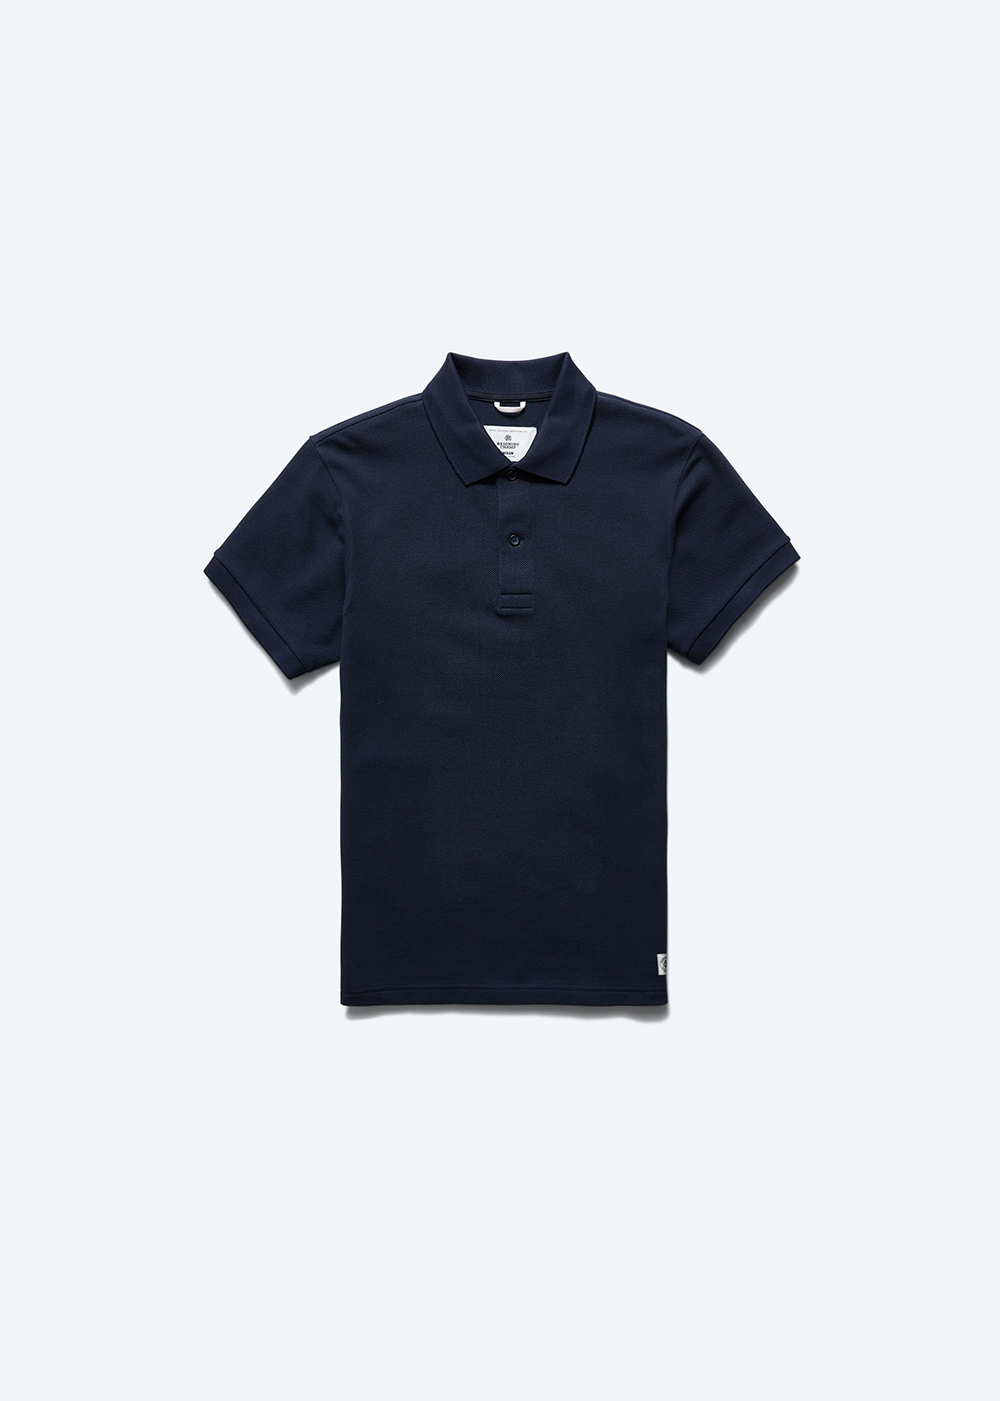 Athletic Pique Polo - Navy - Reigning Champ Canada - Danali - RC-1471